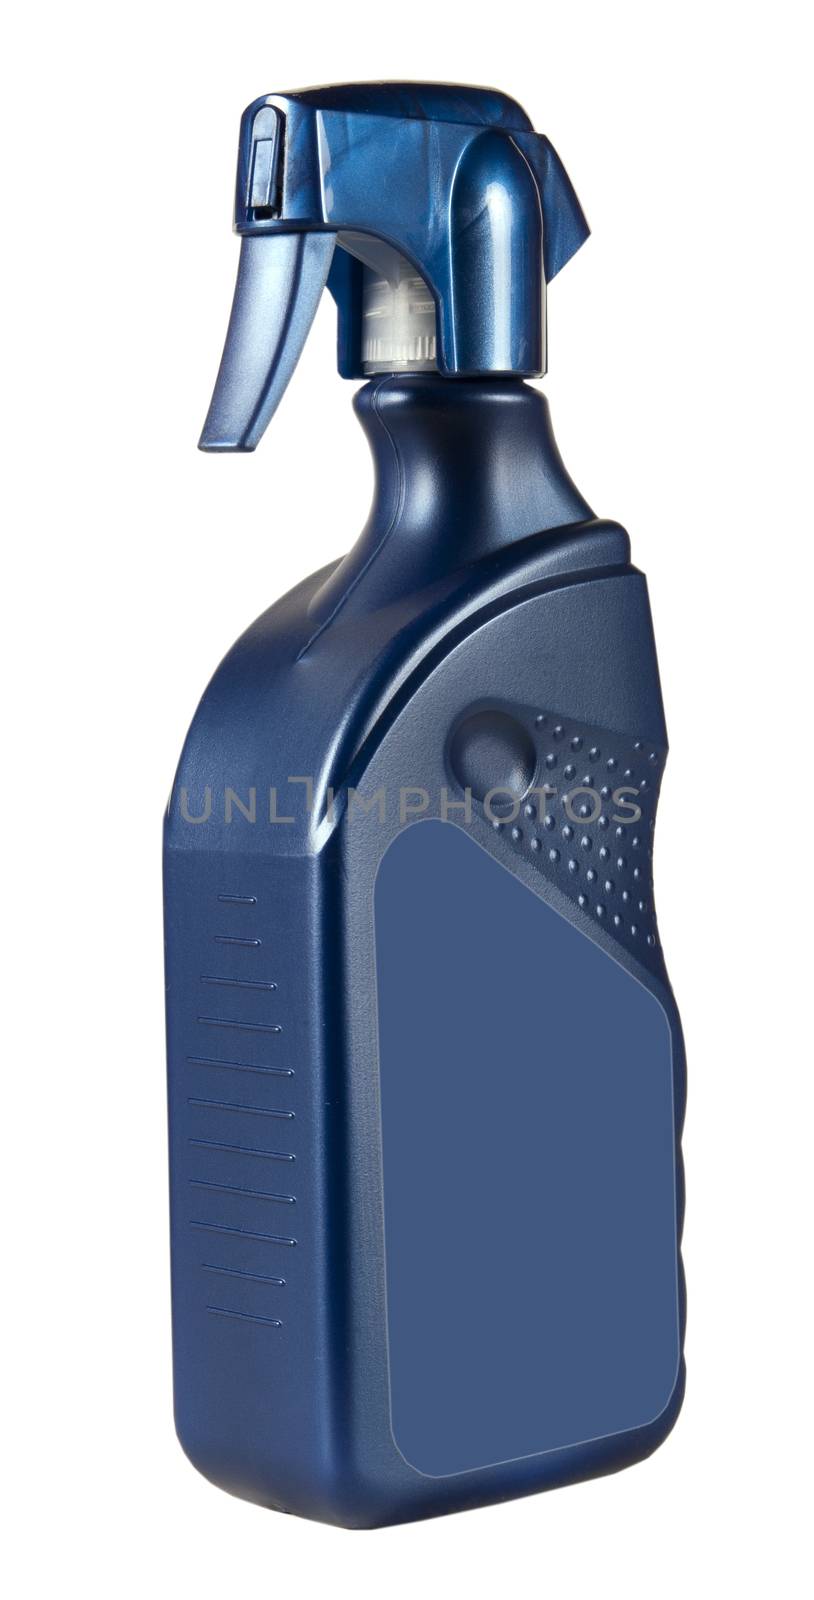 plastic bottle for car cosmetics. Need a car care